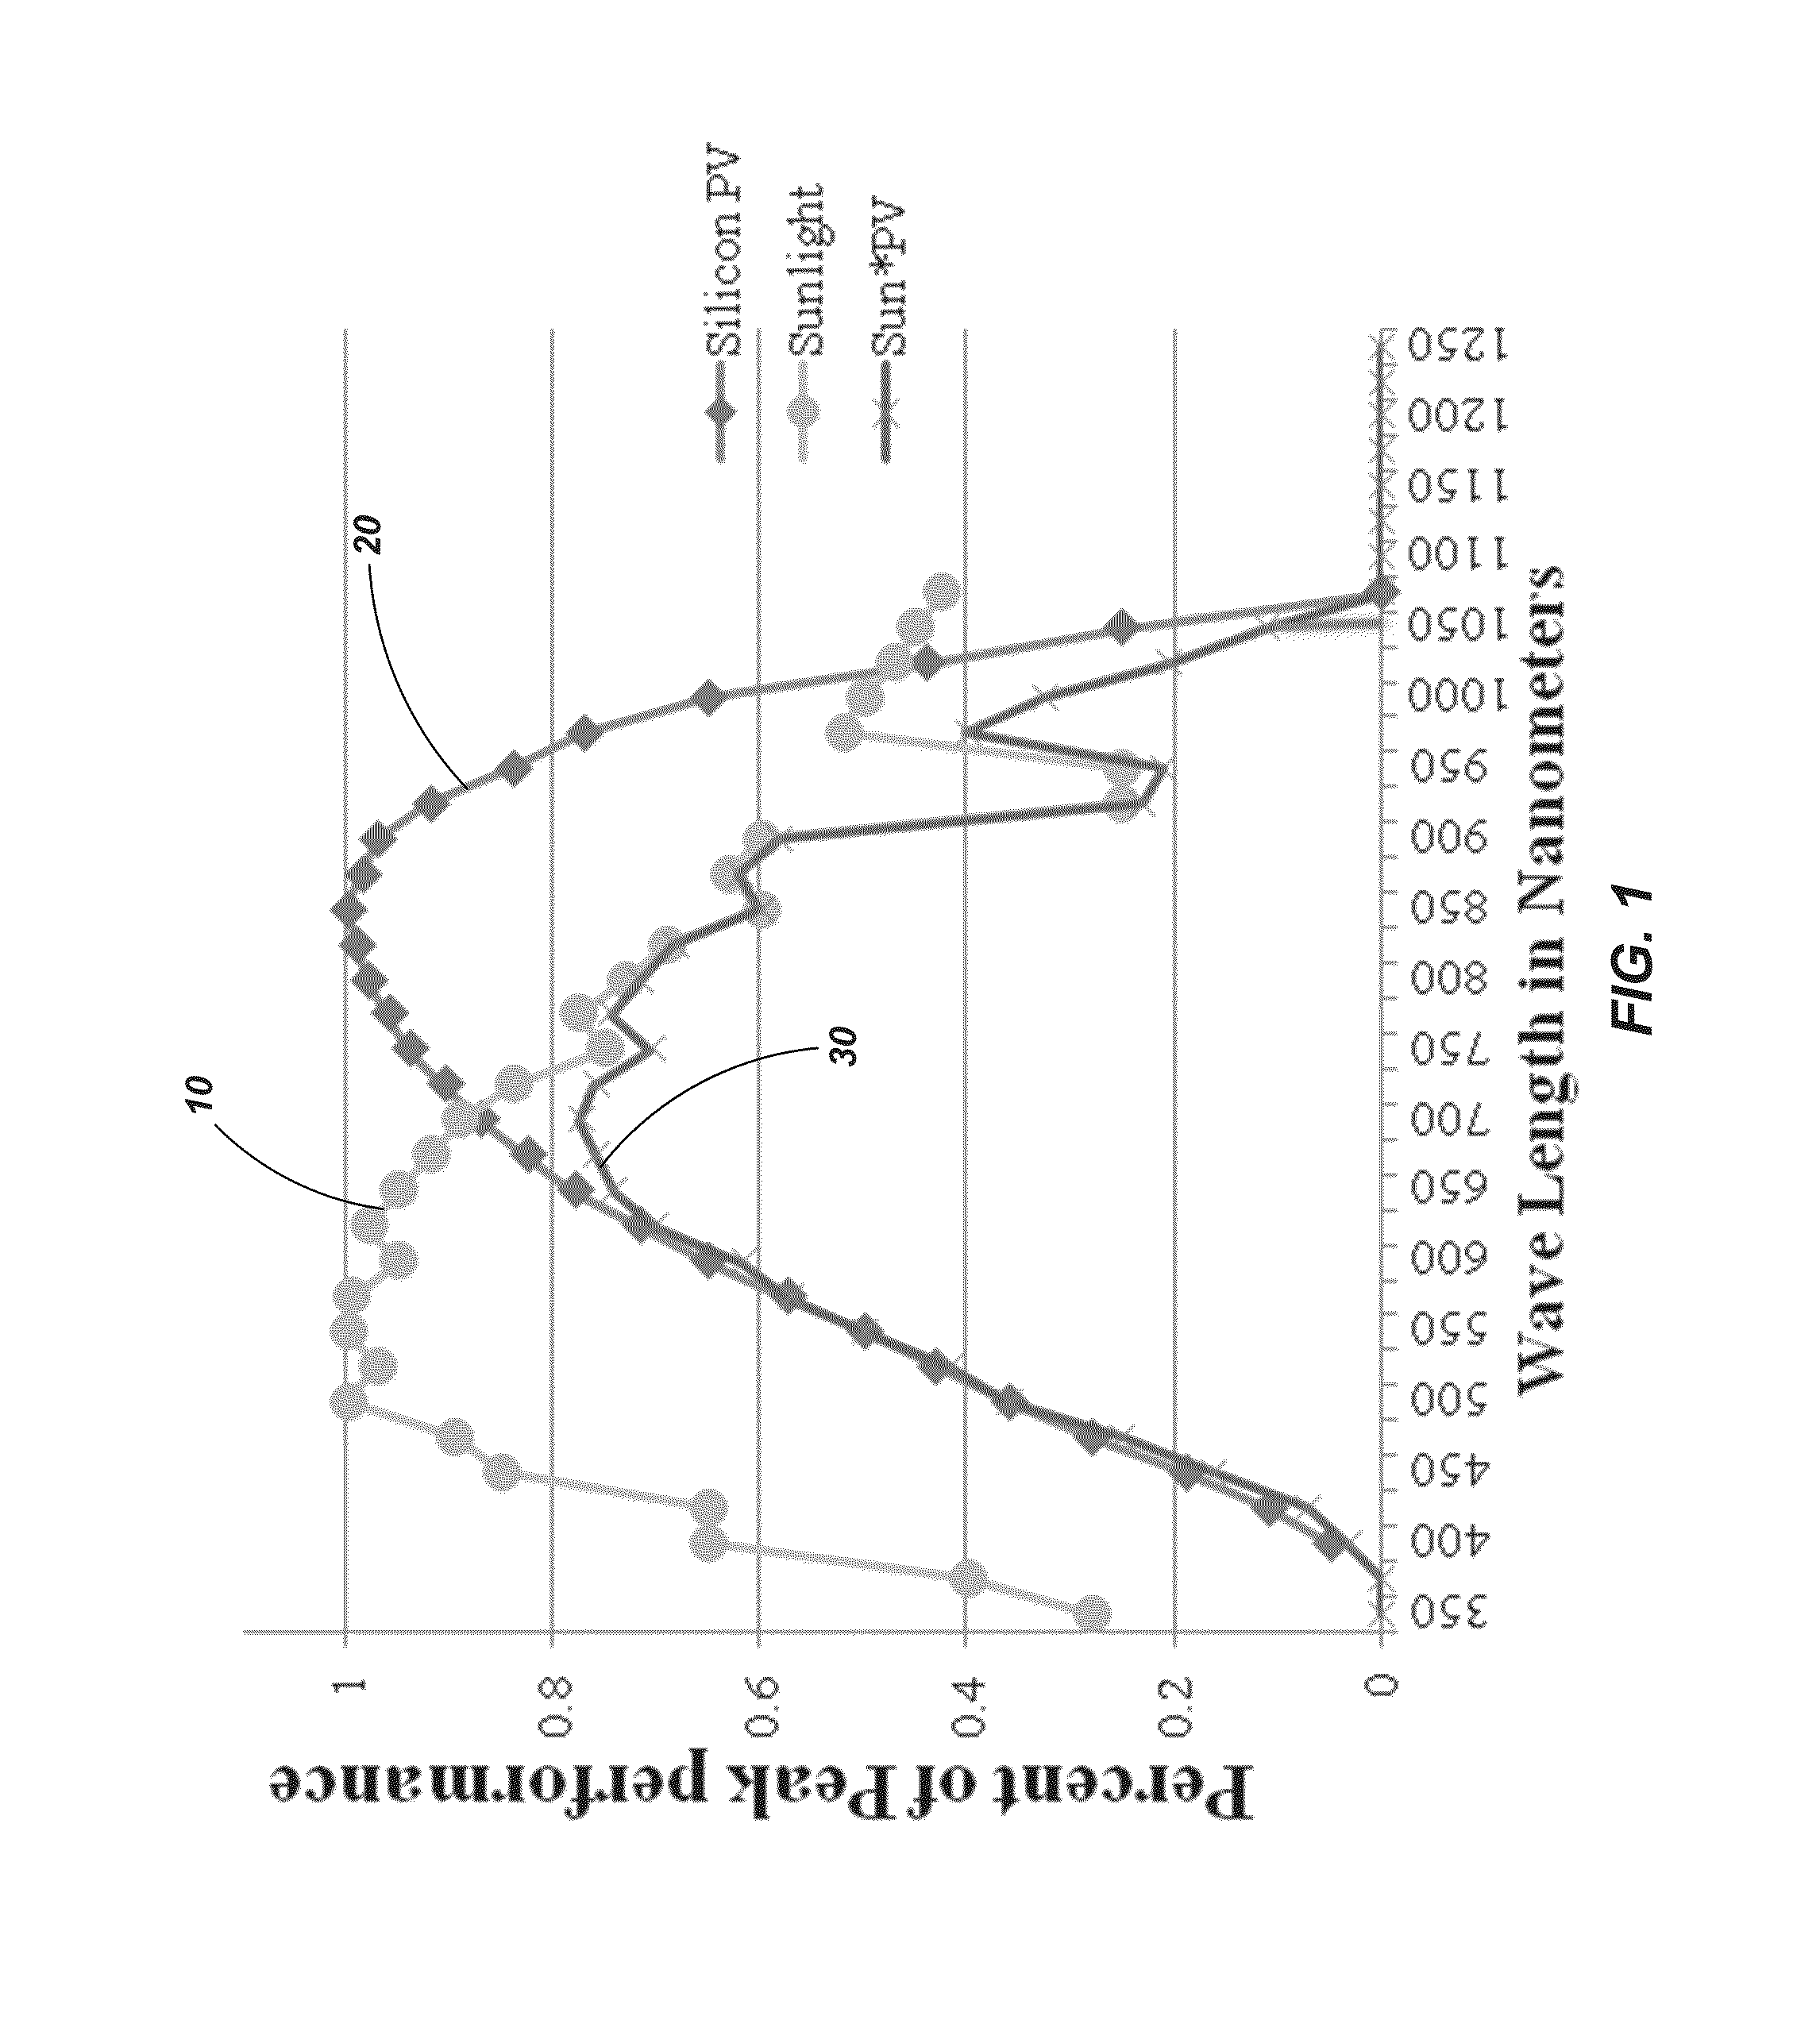 Apparatus, systems and methods for collecting and converting solar energy